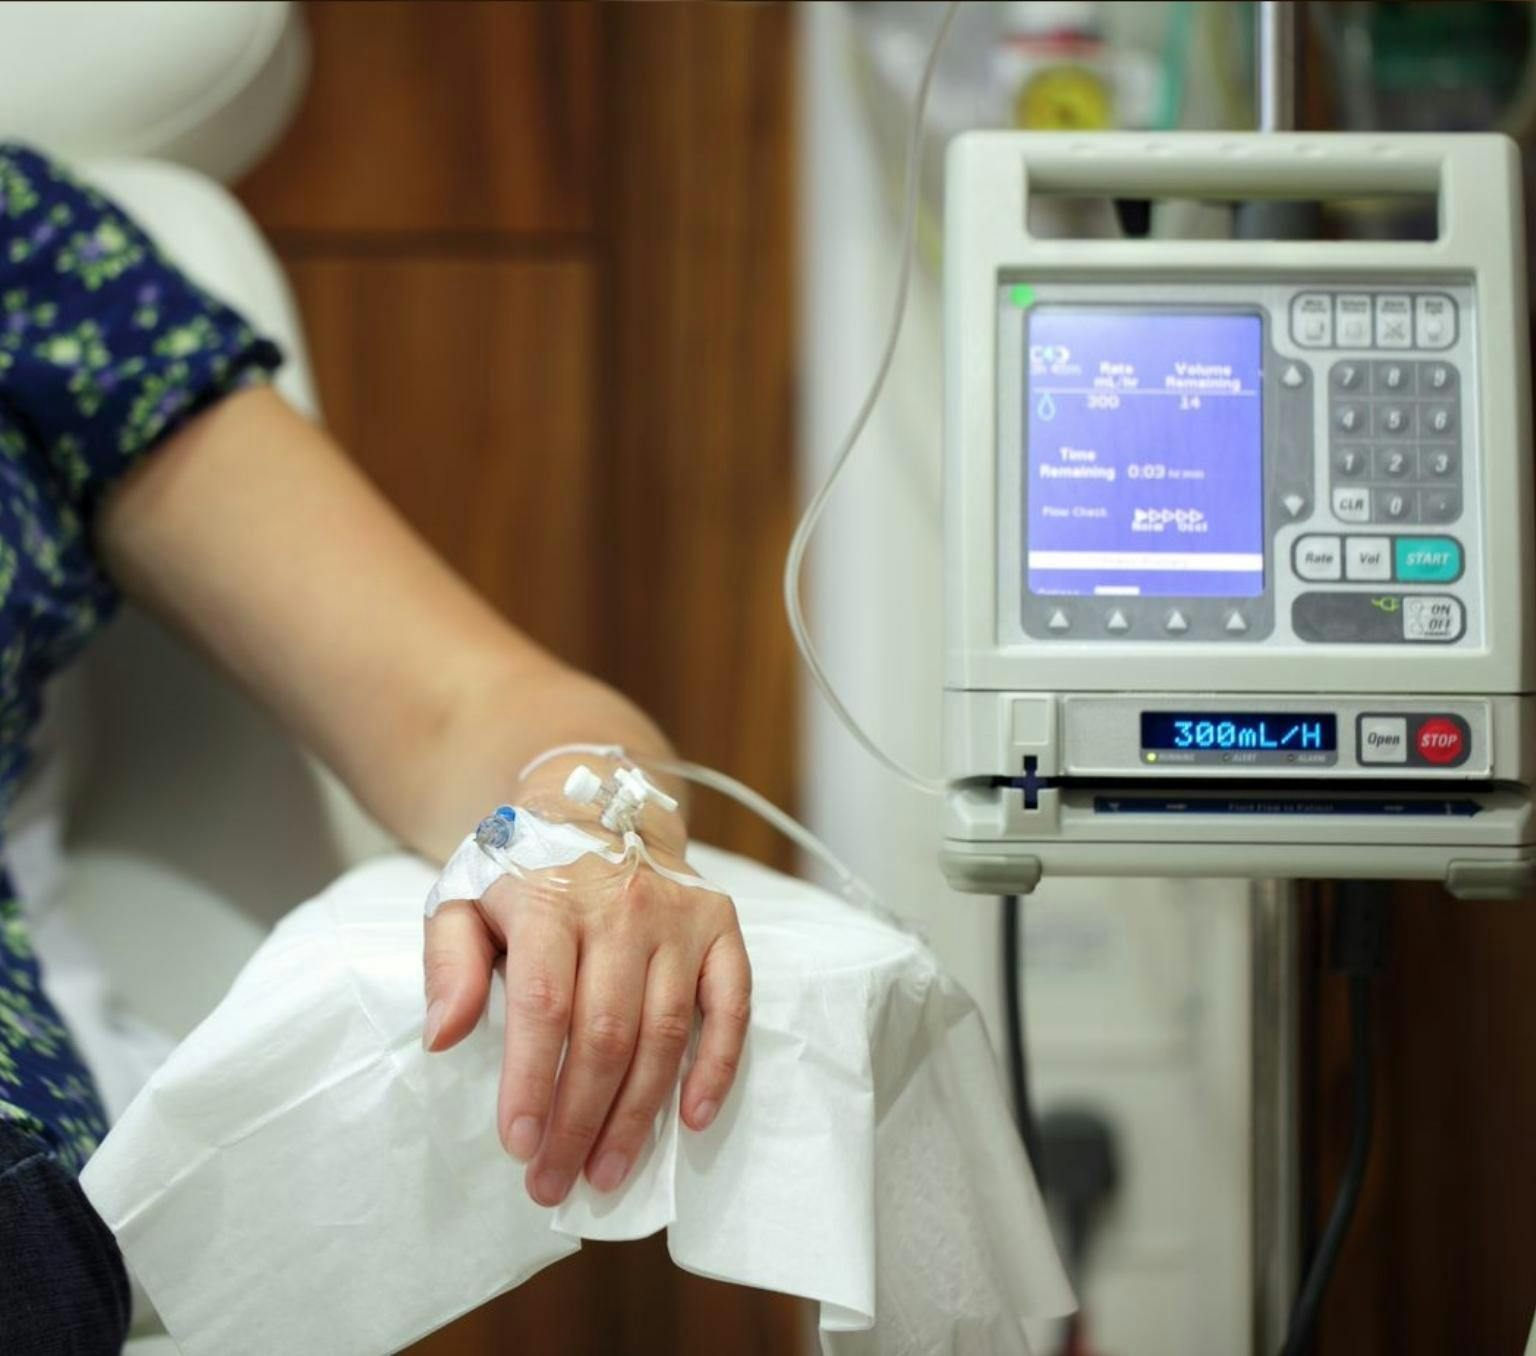 A person's arm with an IV drip and a monitoring machine.